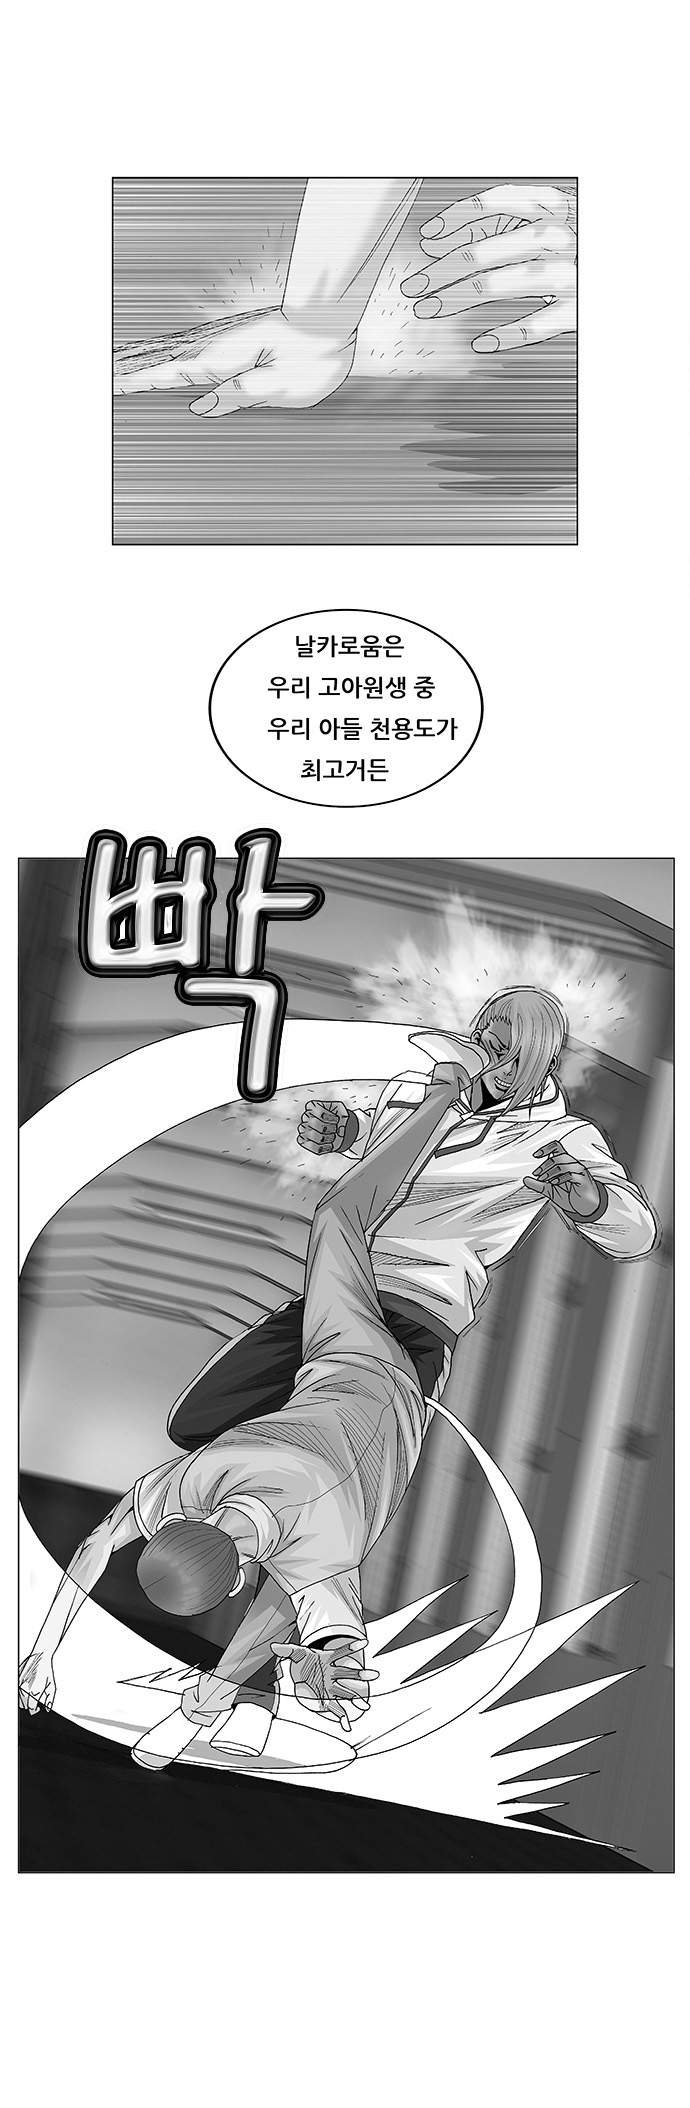 Ultimate Legend - Kang Hae Hyo - Chapter 79 - Page 1